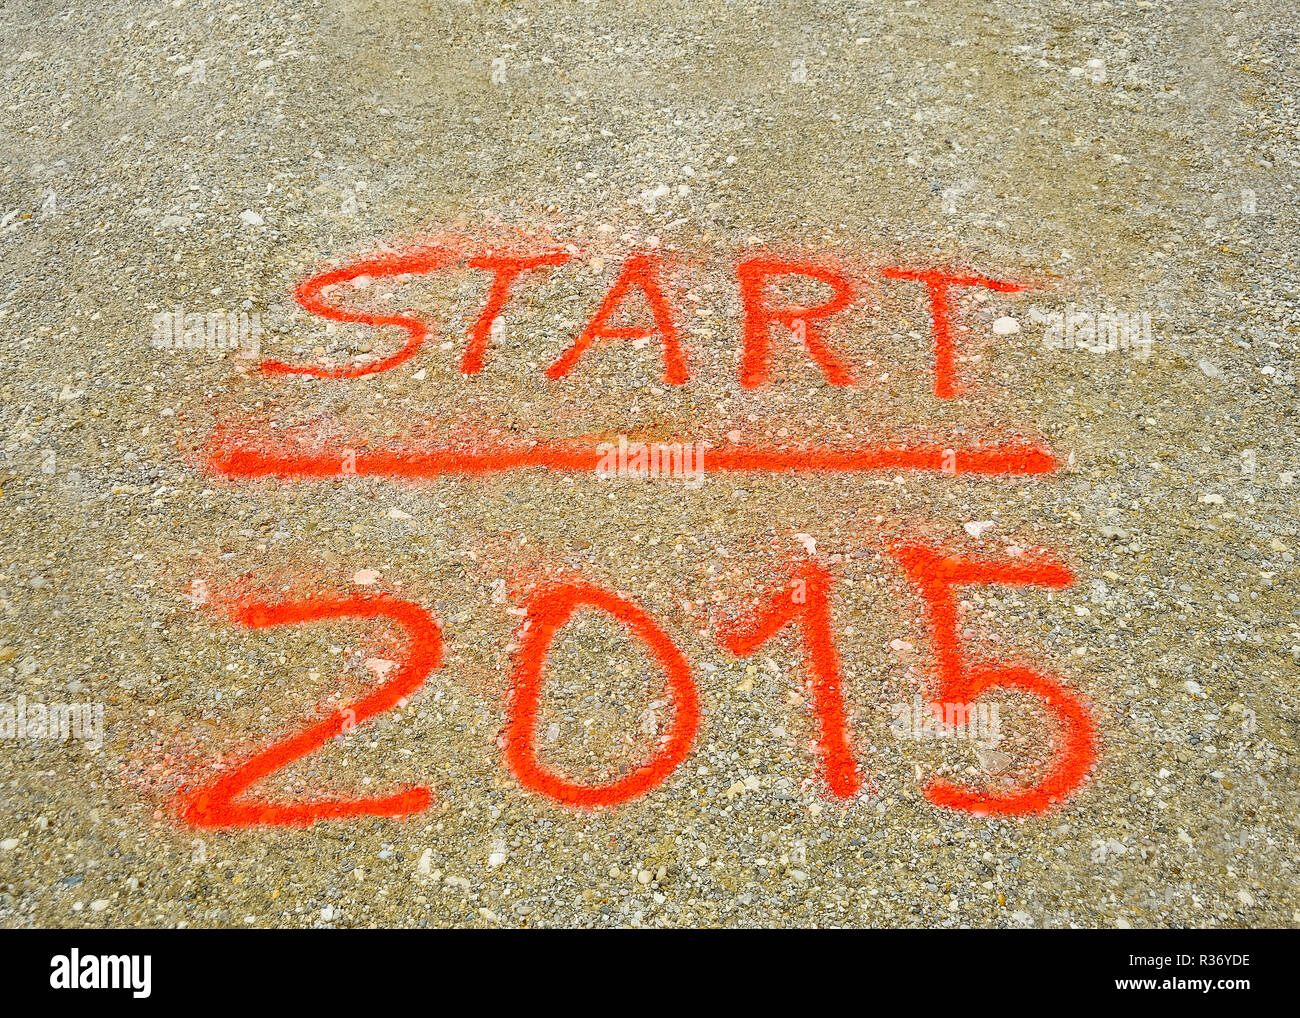 2015 start in the new year Stock Photo